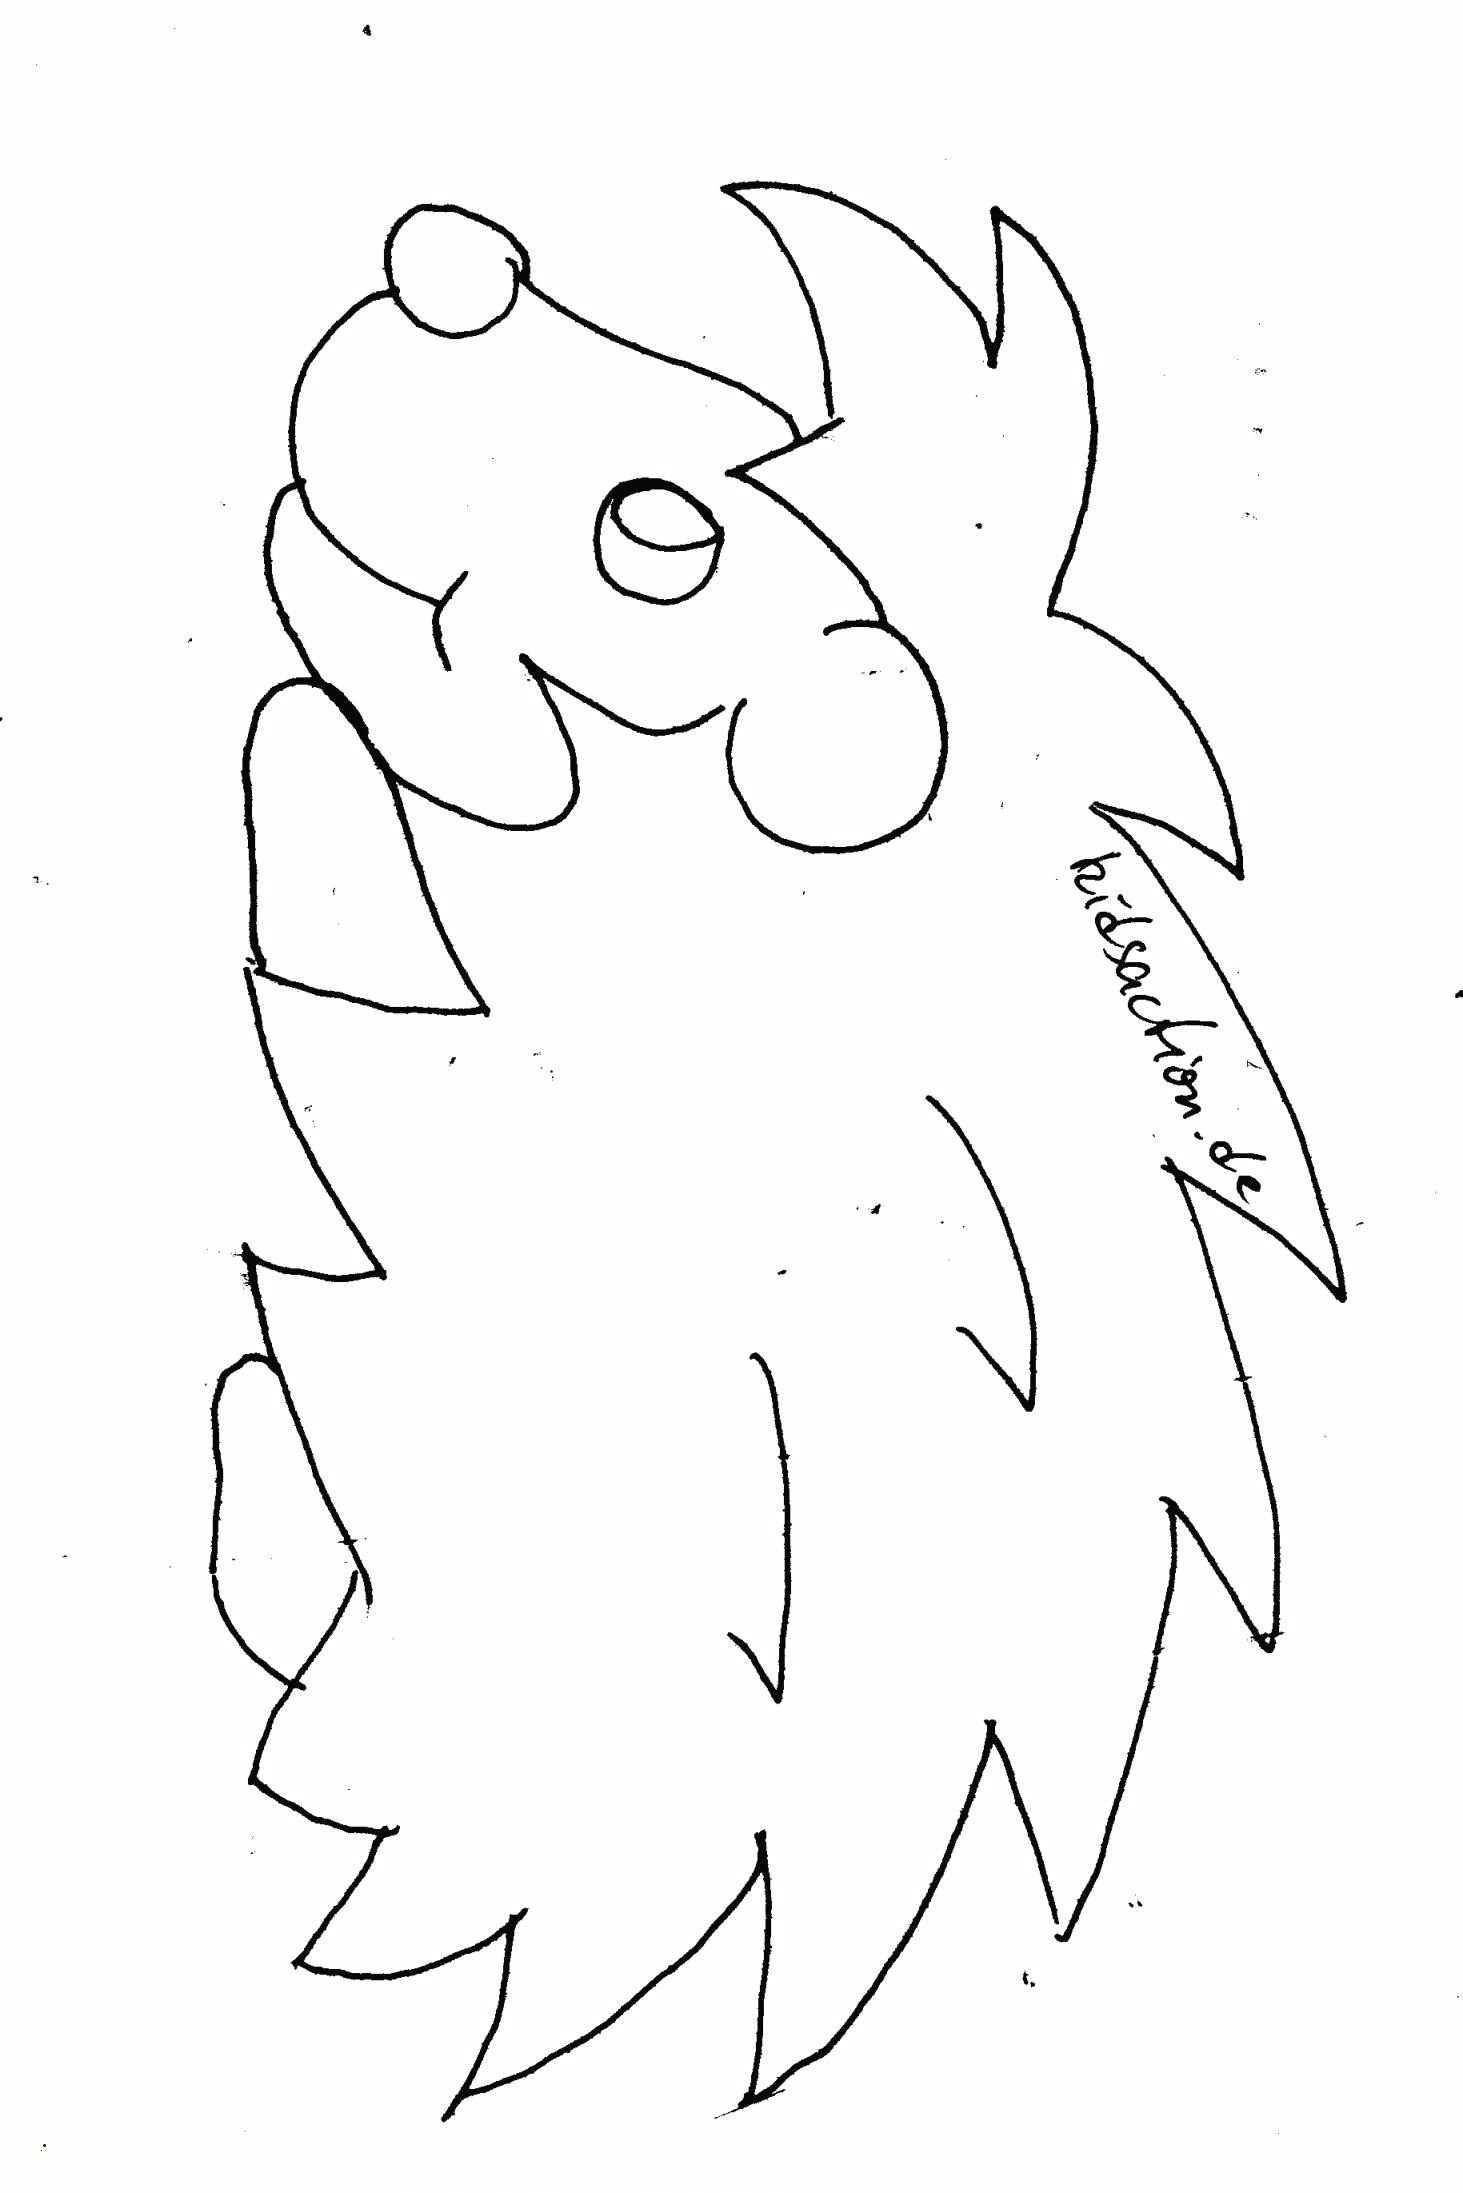 Cute Nemo Drawing Findet Dorie Ausmalbilder Beau Images Marlin Coloring Pages Cute